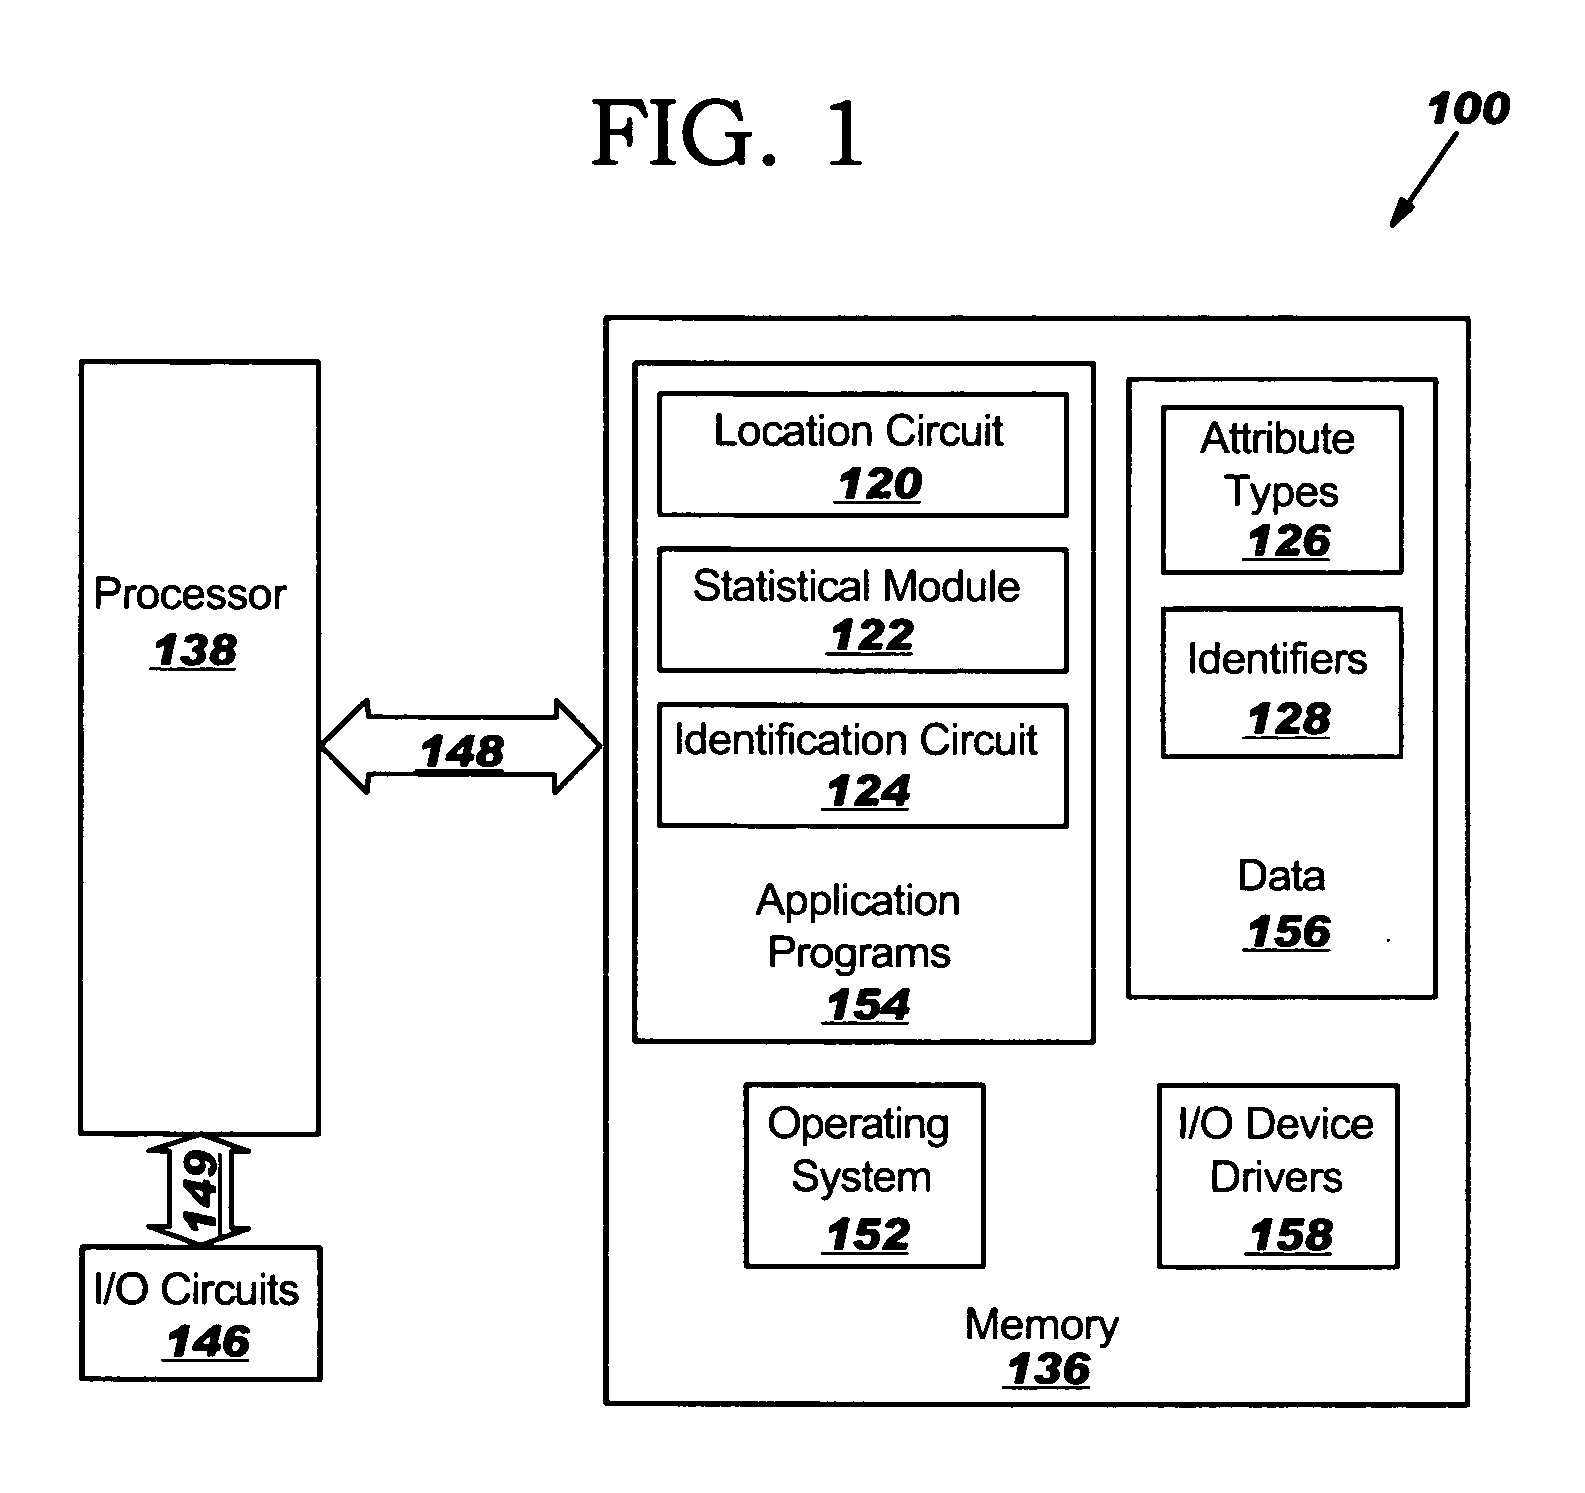 Methods, systems and computer program products for associating records in healthcare databases with individuals